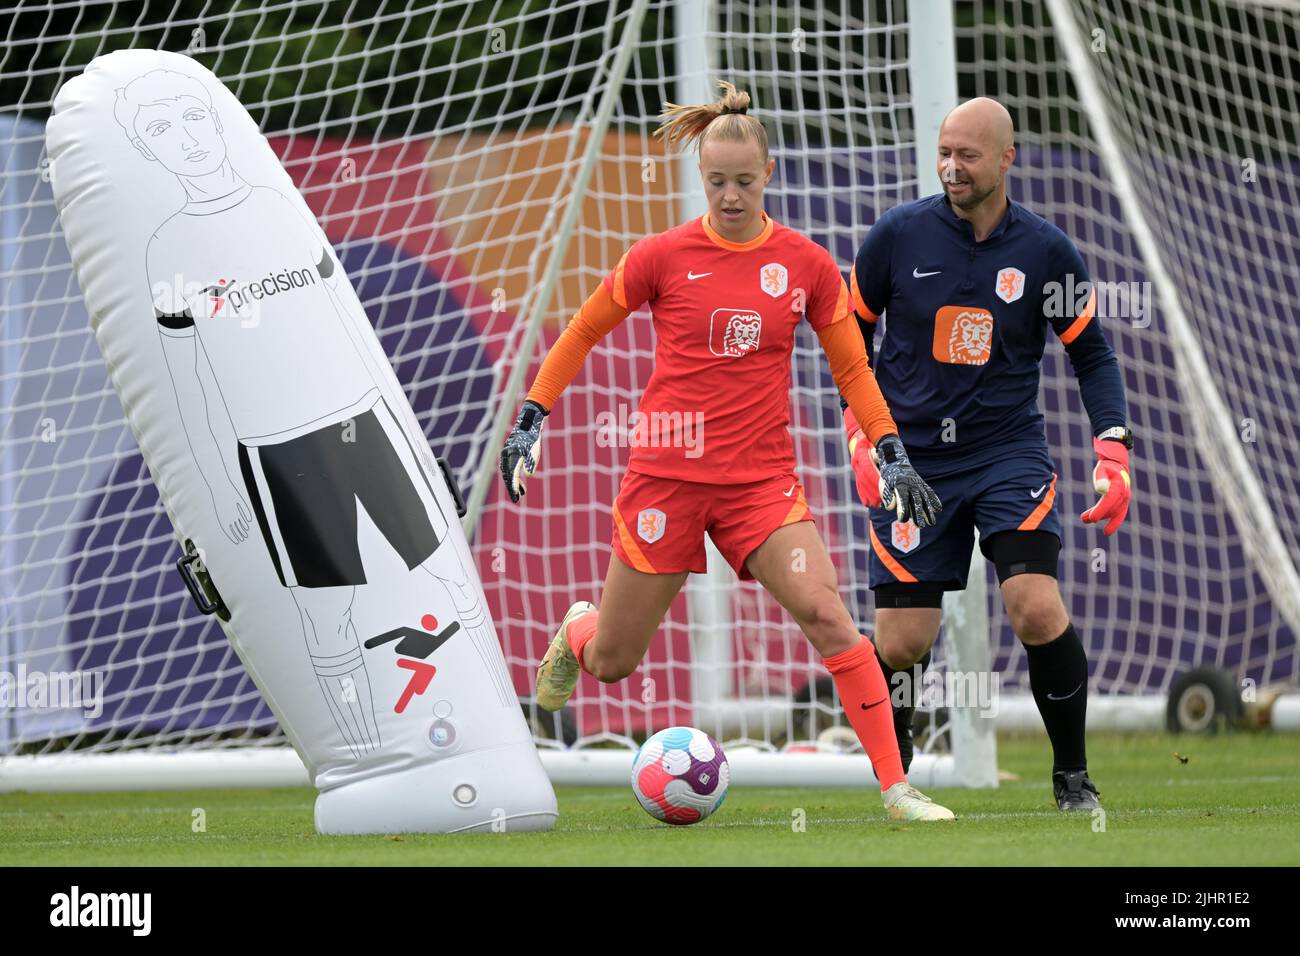 STOCKPORT - UK, 20/07/2022, (lr) Holland women goalkeeper Daphne van Domselaar, Holland women goalkeeper trainer Erskine Schoenmakers during a training session of the Dutch women's national team on July 20, 2022 at Stockport County FC in Stockport prior to the UEFA Women's EURO England 2022 game against France. ANP GERRIT VAN COLOGNE Stock Photo